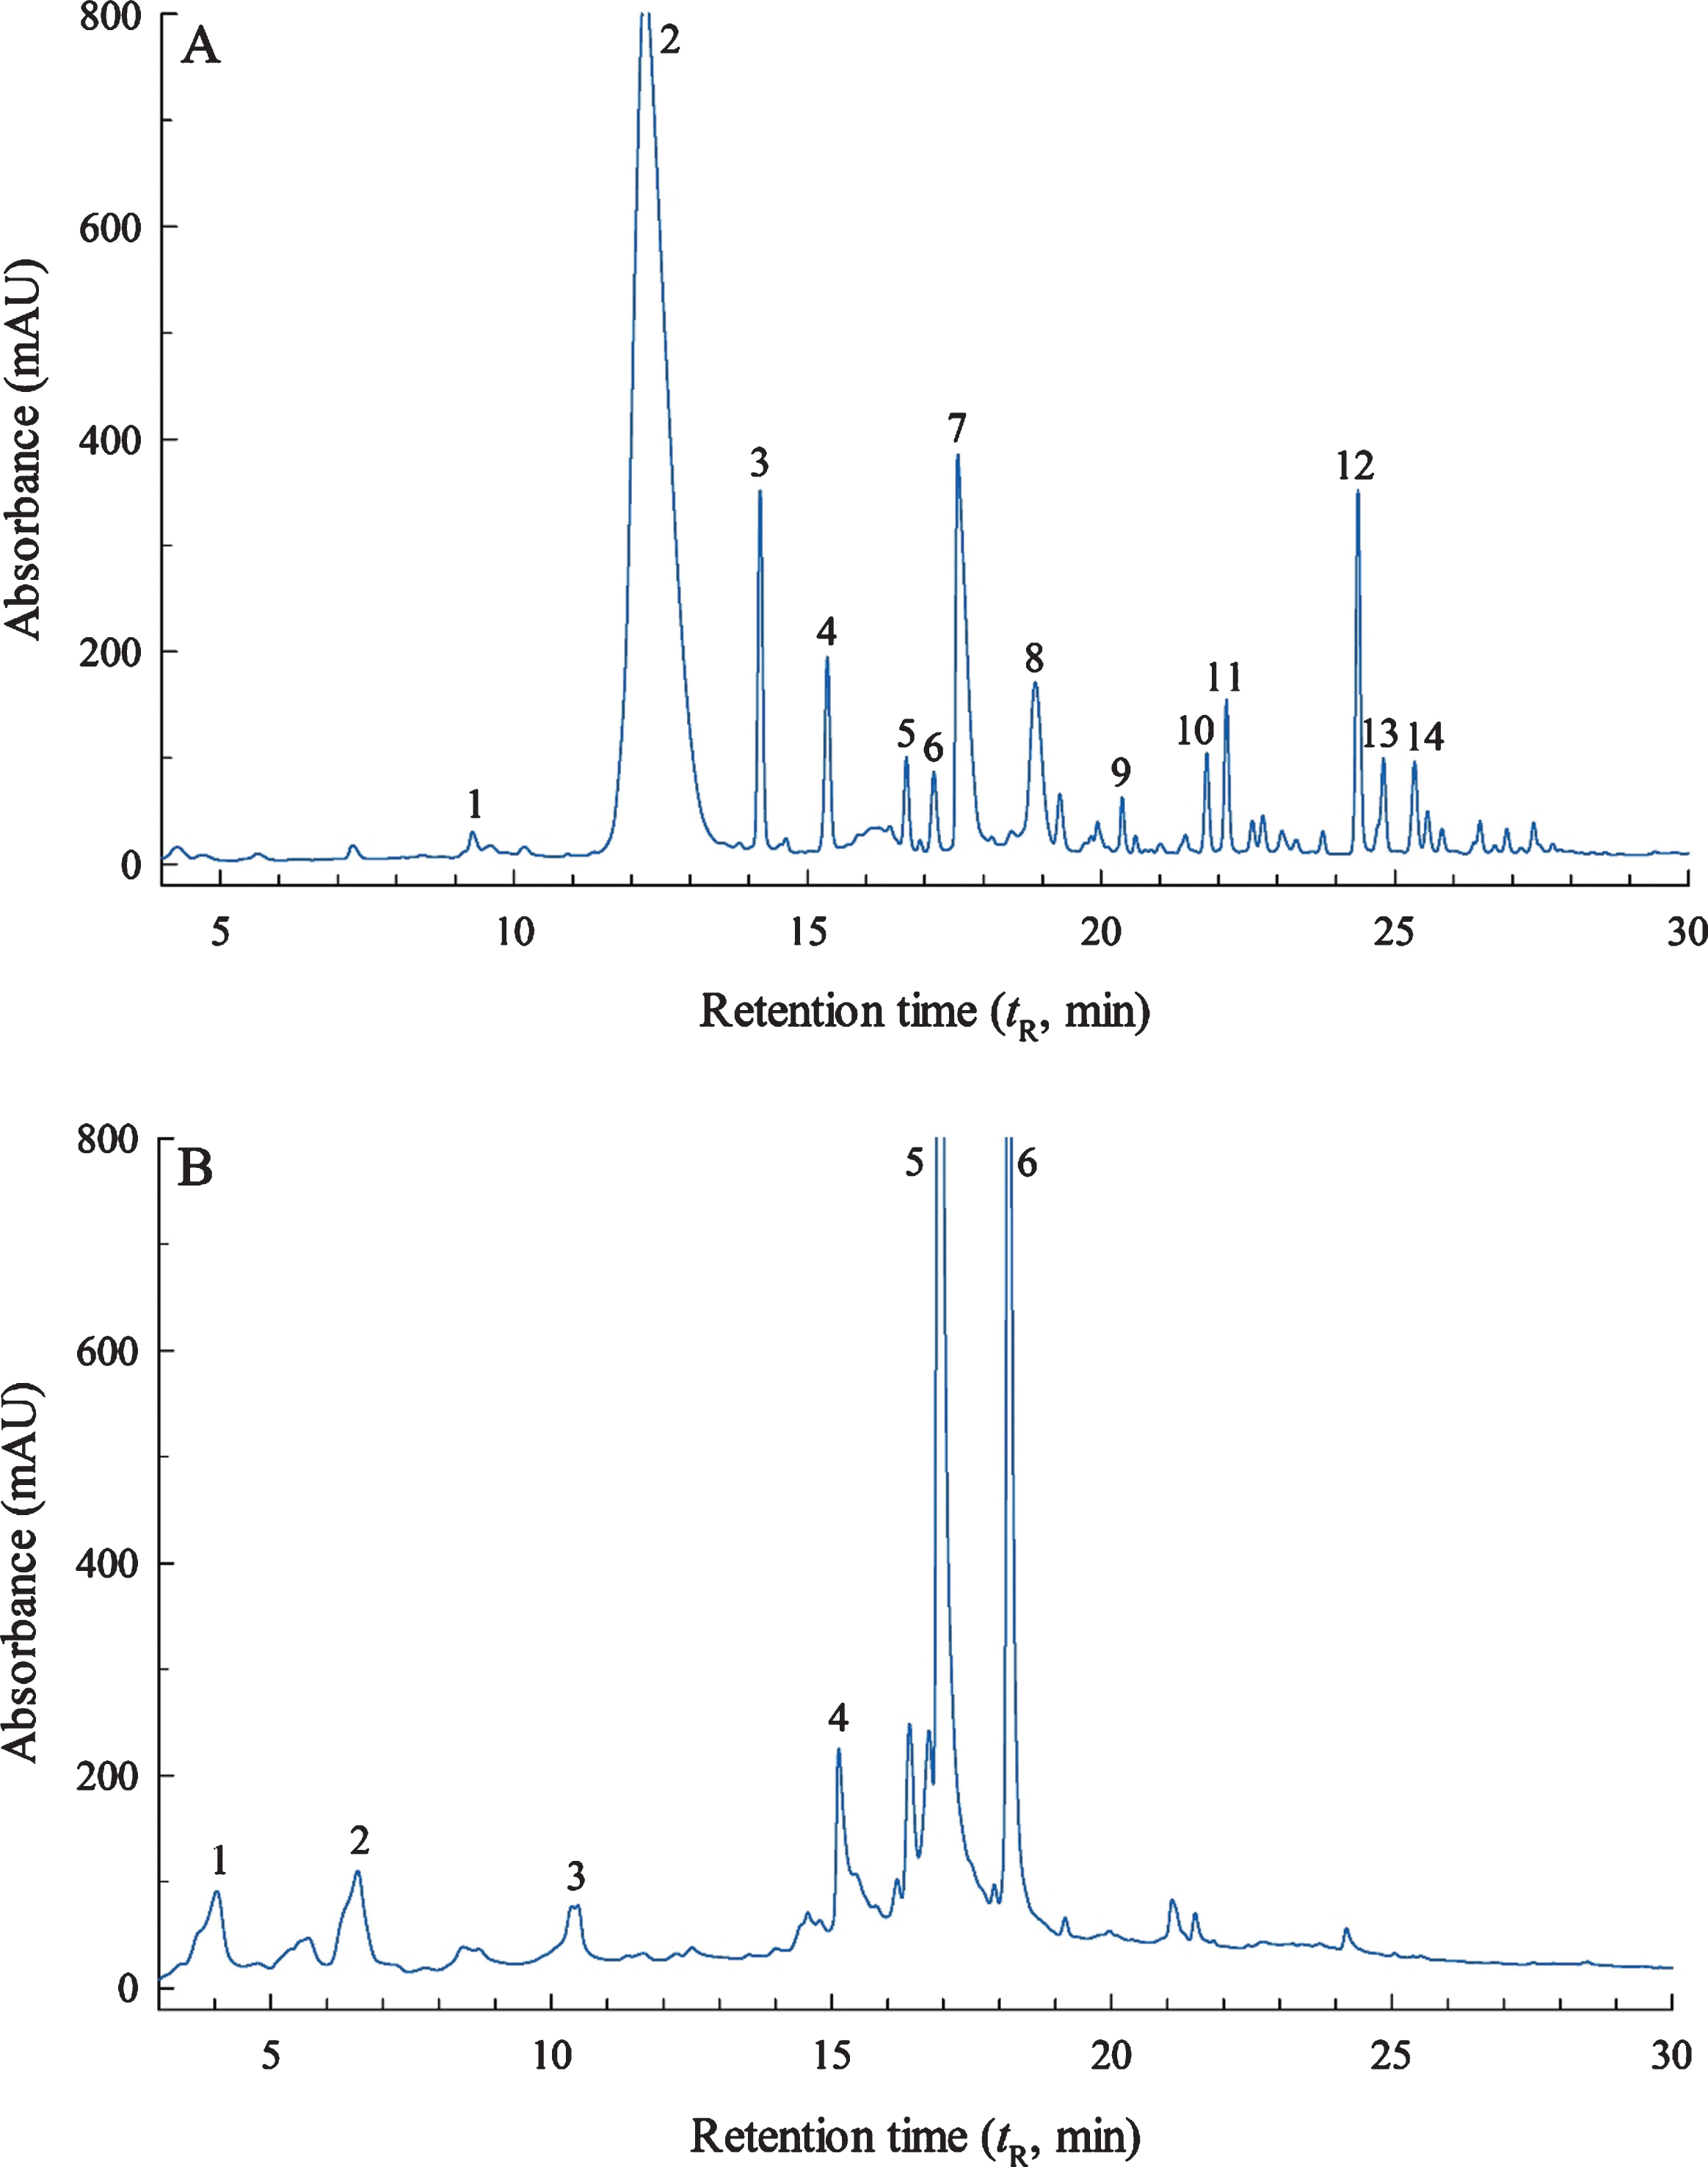 Reversed-phase HPLC chromatograms at λ= 255 nm of (A) fraction 2; and (B) the high-molecular-weight (HMW) fraction isolated by Sephadex LH-20 column chromatography from a crude extract of the blackberry variety ‘Ouachita’.